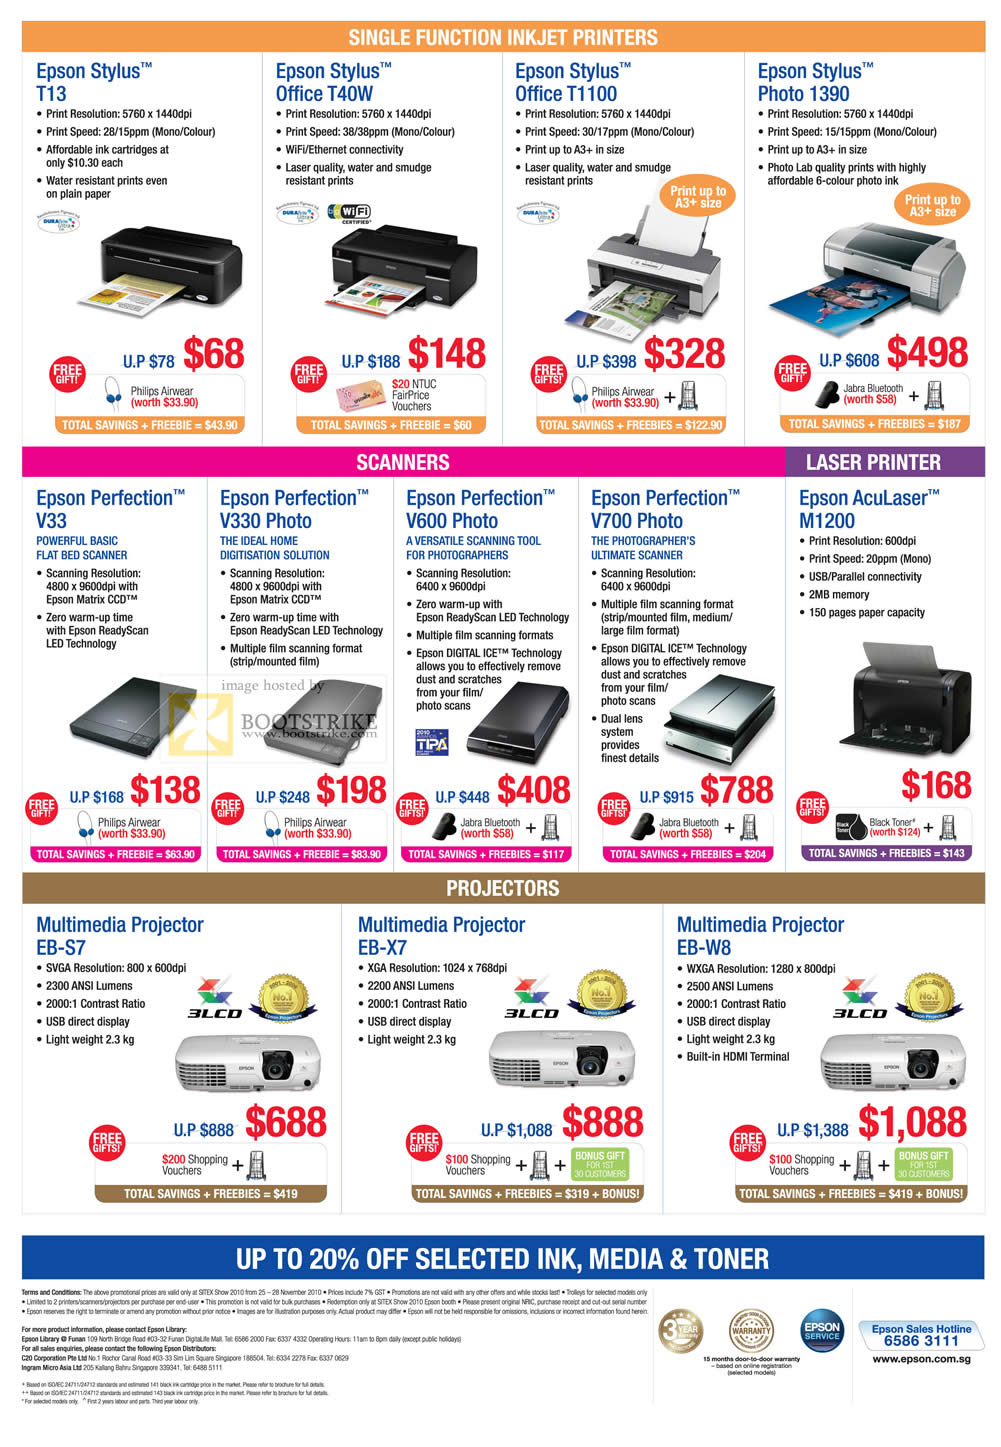 Sitex 2010 price list image brochure of Epson Inkjet Printers Stylus T13 Office Photo 1390 Scanners Perfection V33 V330 AcuLaser M1200 Laser Projectors EB